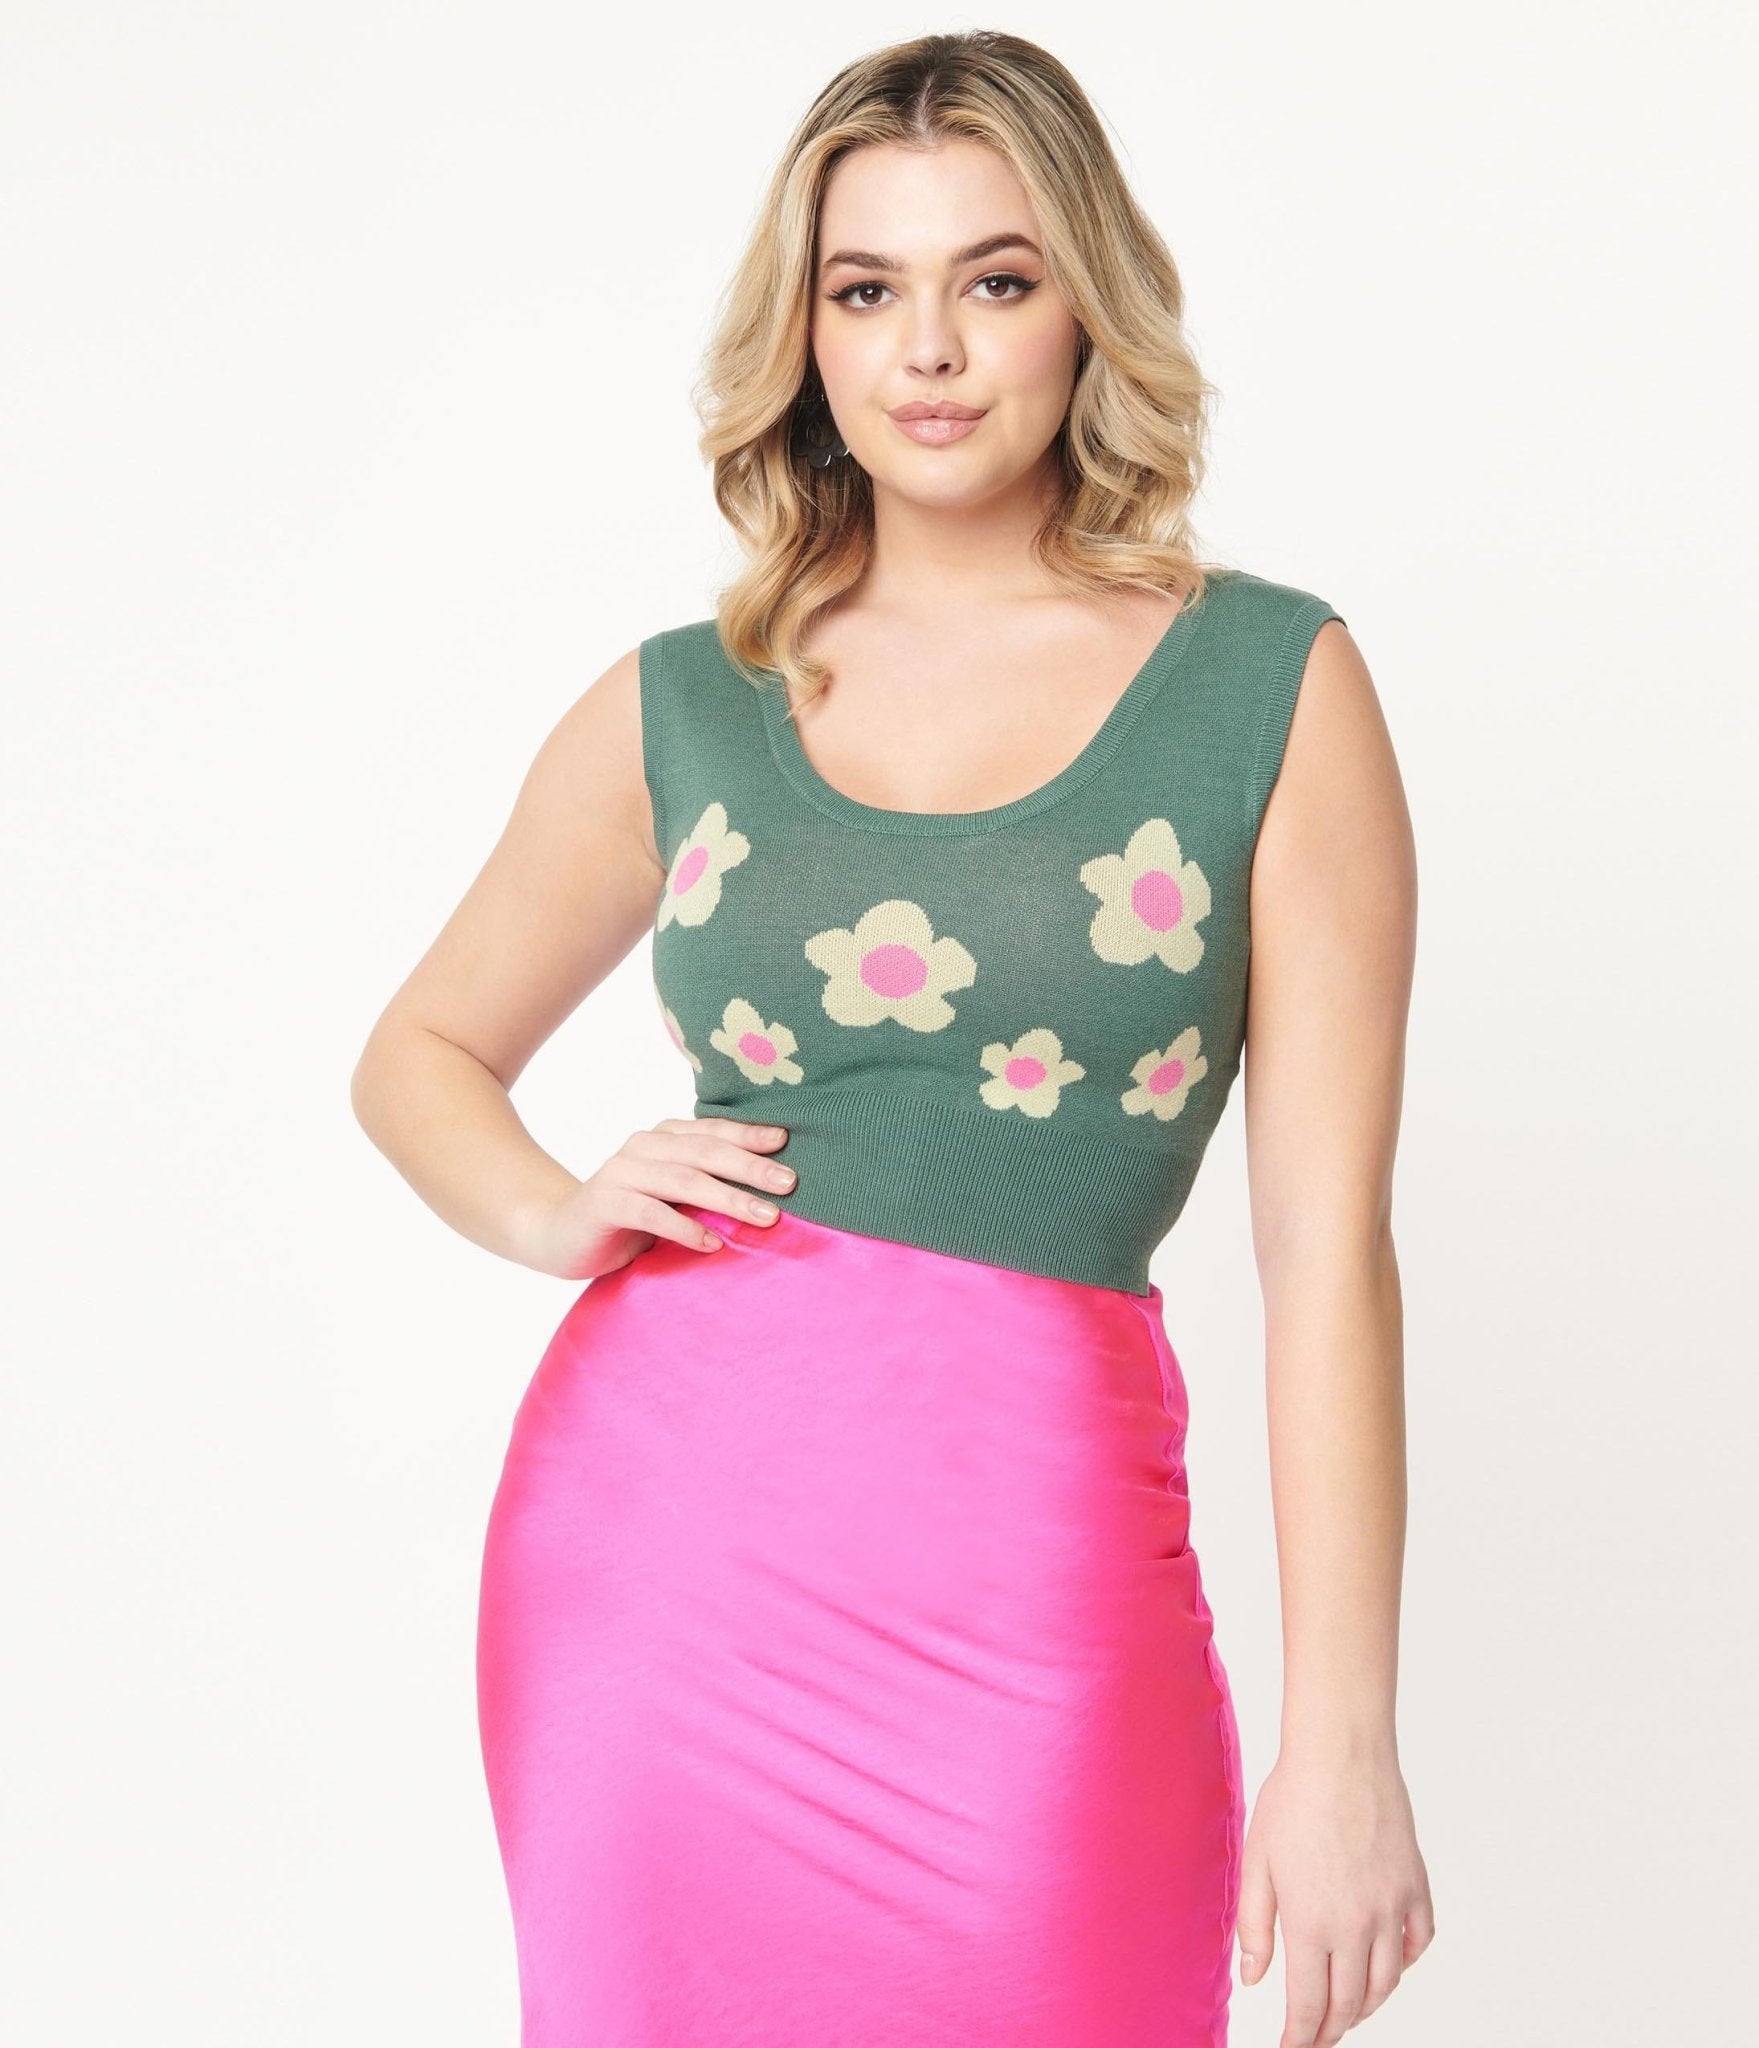 Teal Green & Mint Daisy Crop Top Sweater - Unique Vintage - Womens, TOPS, SWEATERS